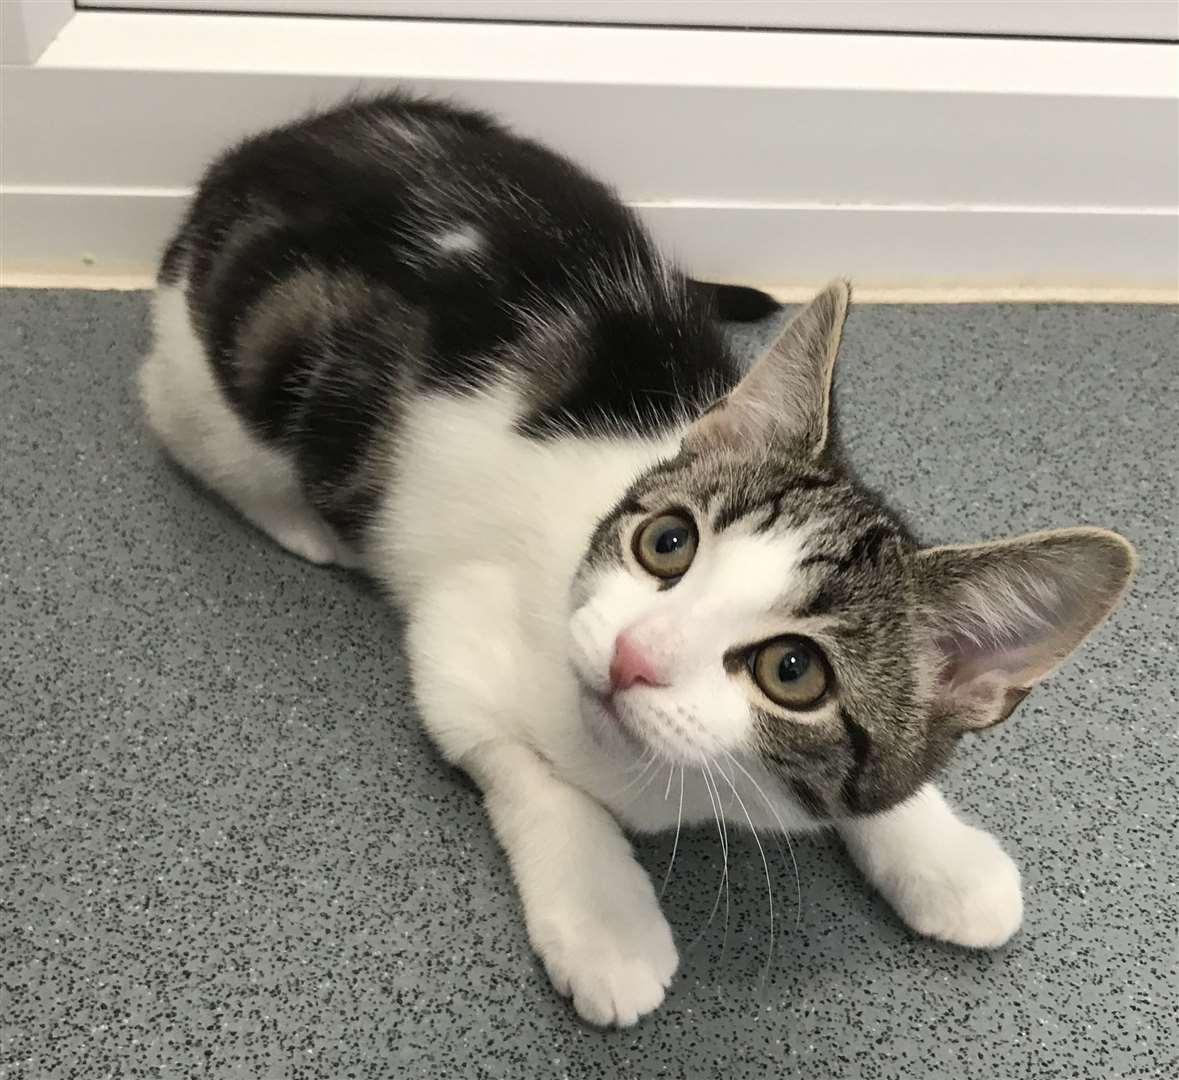 Hope is ready for adoption (Cats Protection/PA)